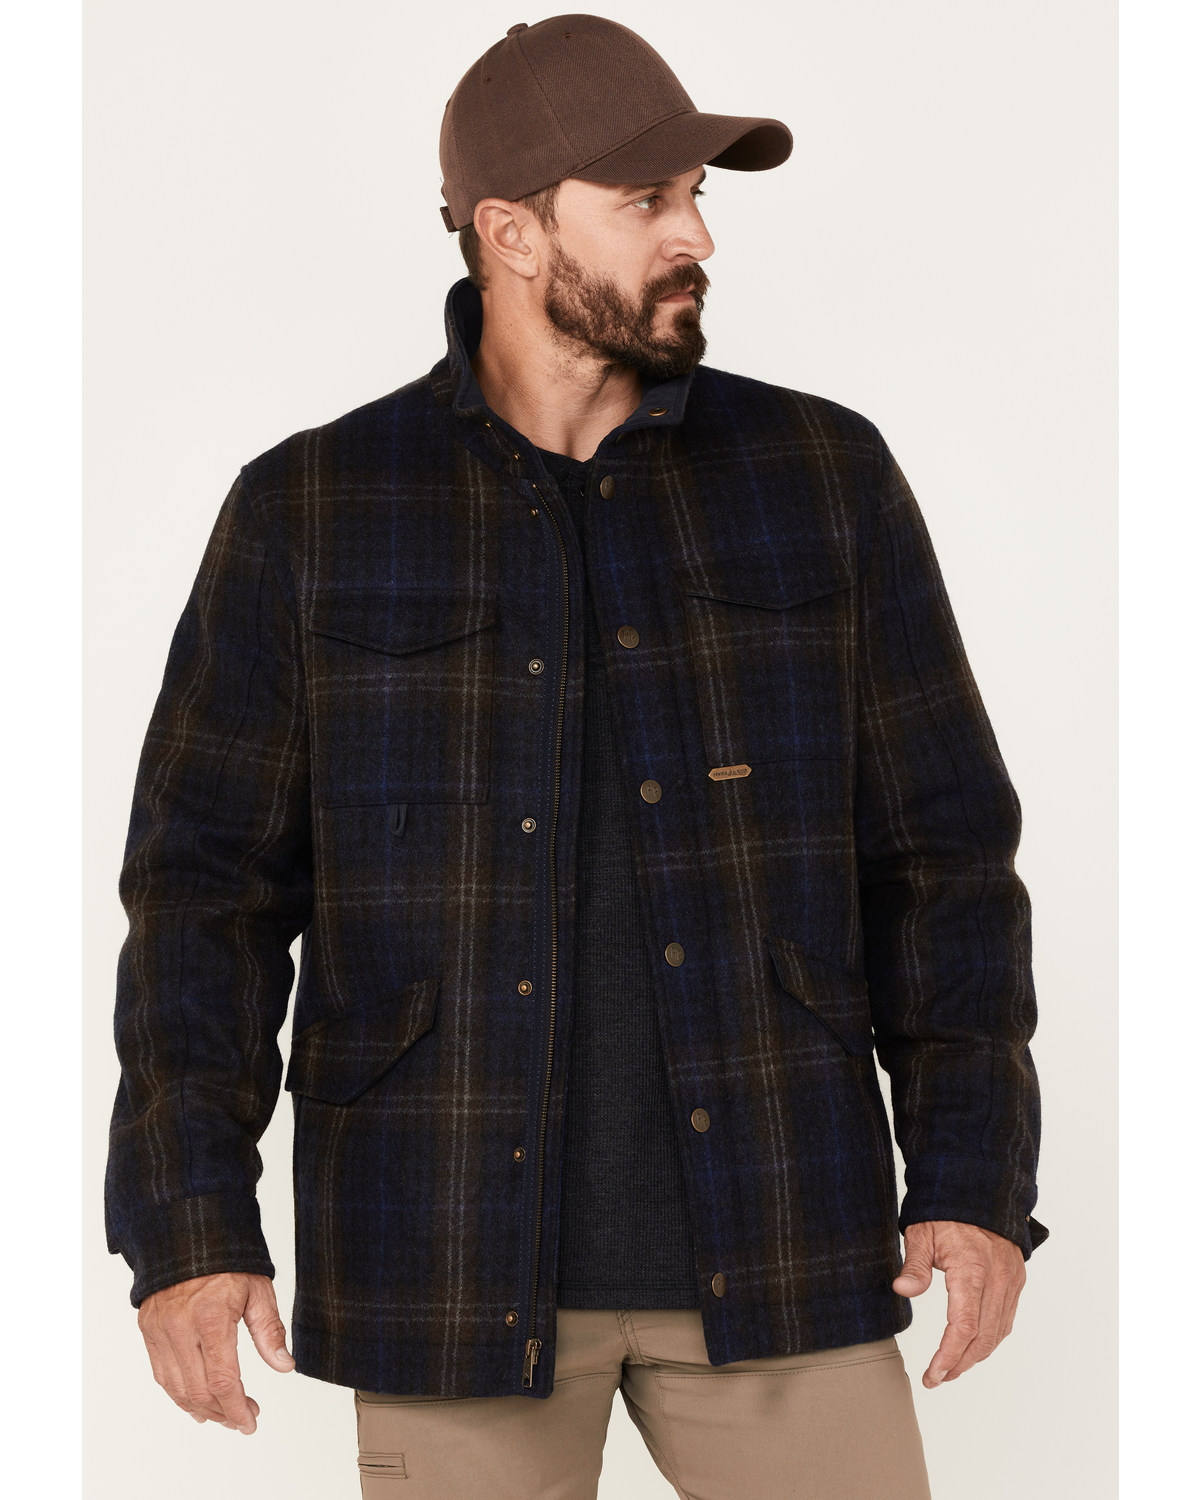 Powder River Outfitters Men's Full Snap Large Plaid Wool Jacket